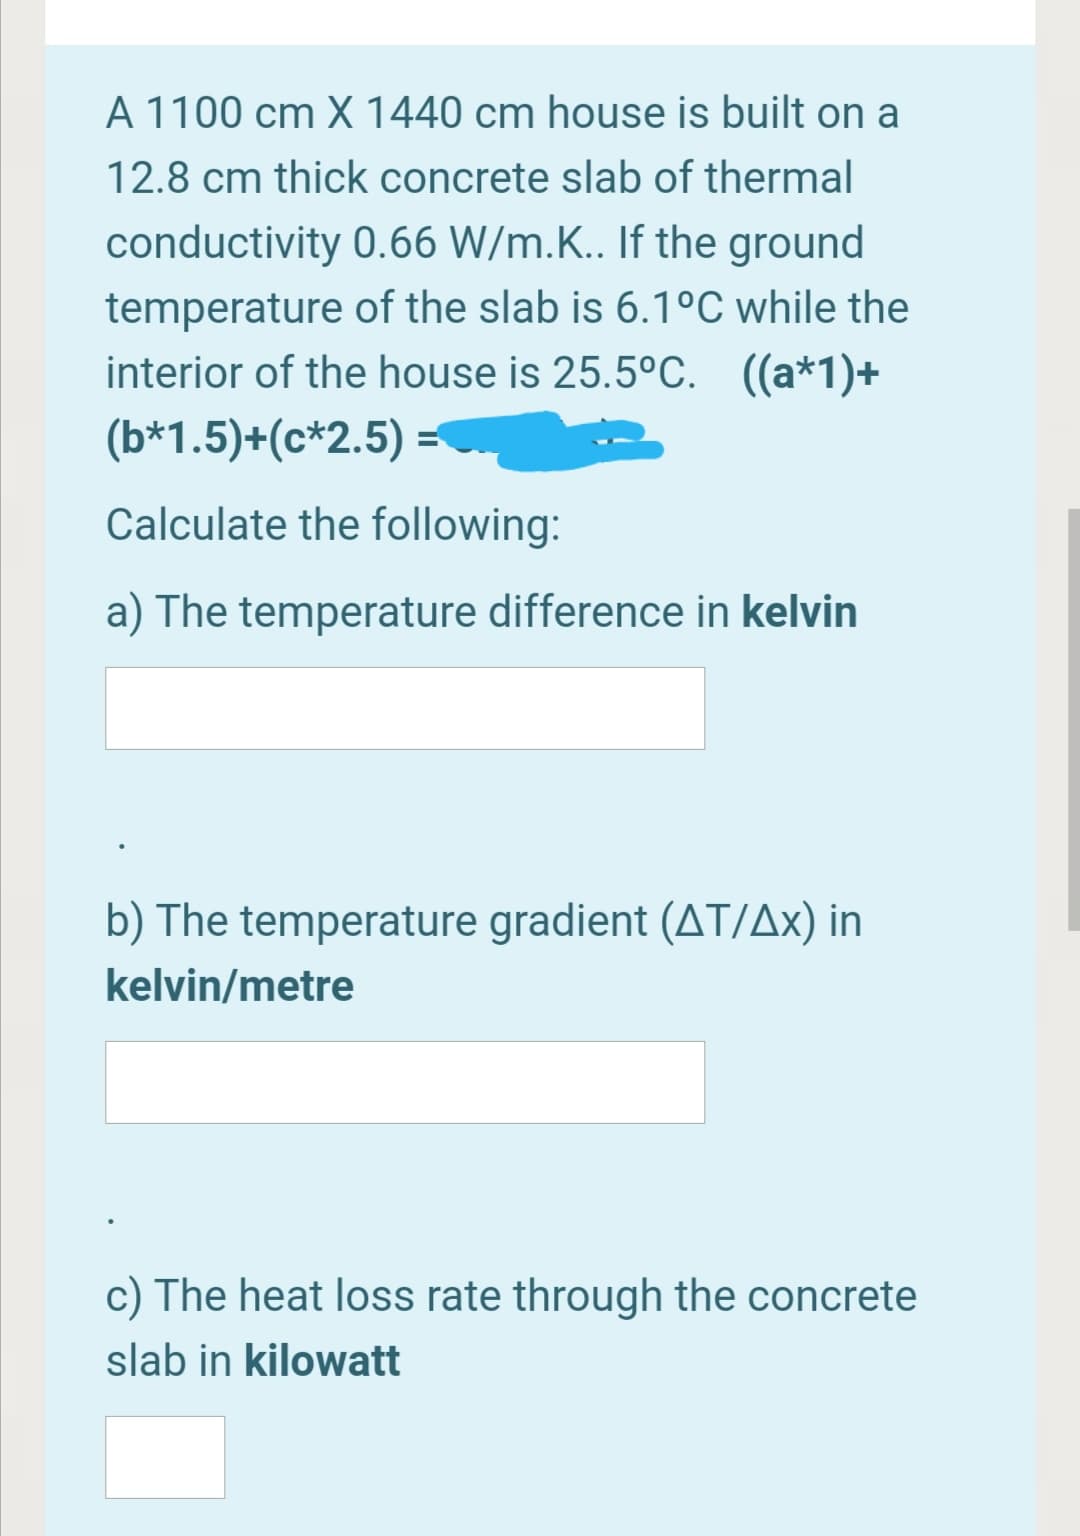 A 1100 cm X 1440 cm house is built on a
12.8 cm thick concrete slab of thermal
conductivity 0.66 W/m.K.. If the ground
temperature of the slab is 6.1°C while the
interior of the house is 25.5°C. ((a*1)+
(b*1.5)+(c*2.5) =
Calculate the following:
a) The temperature difference in kelvin
b) The temperature gradient (AT/Ax) in
kelvin/metre
c) The heat loss rate through the concrete
slab in kilowatt
